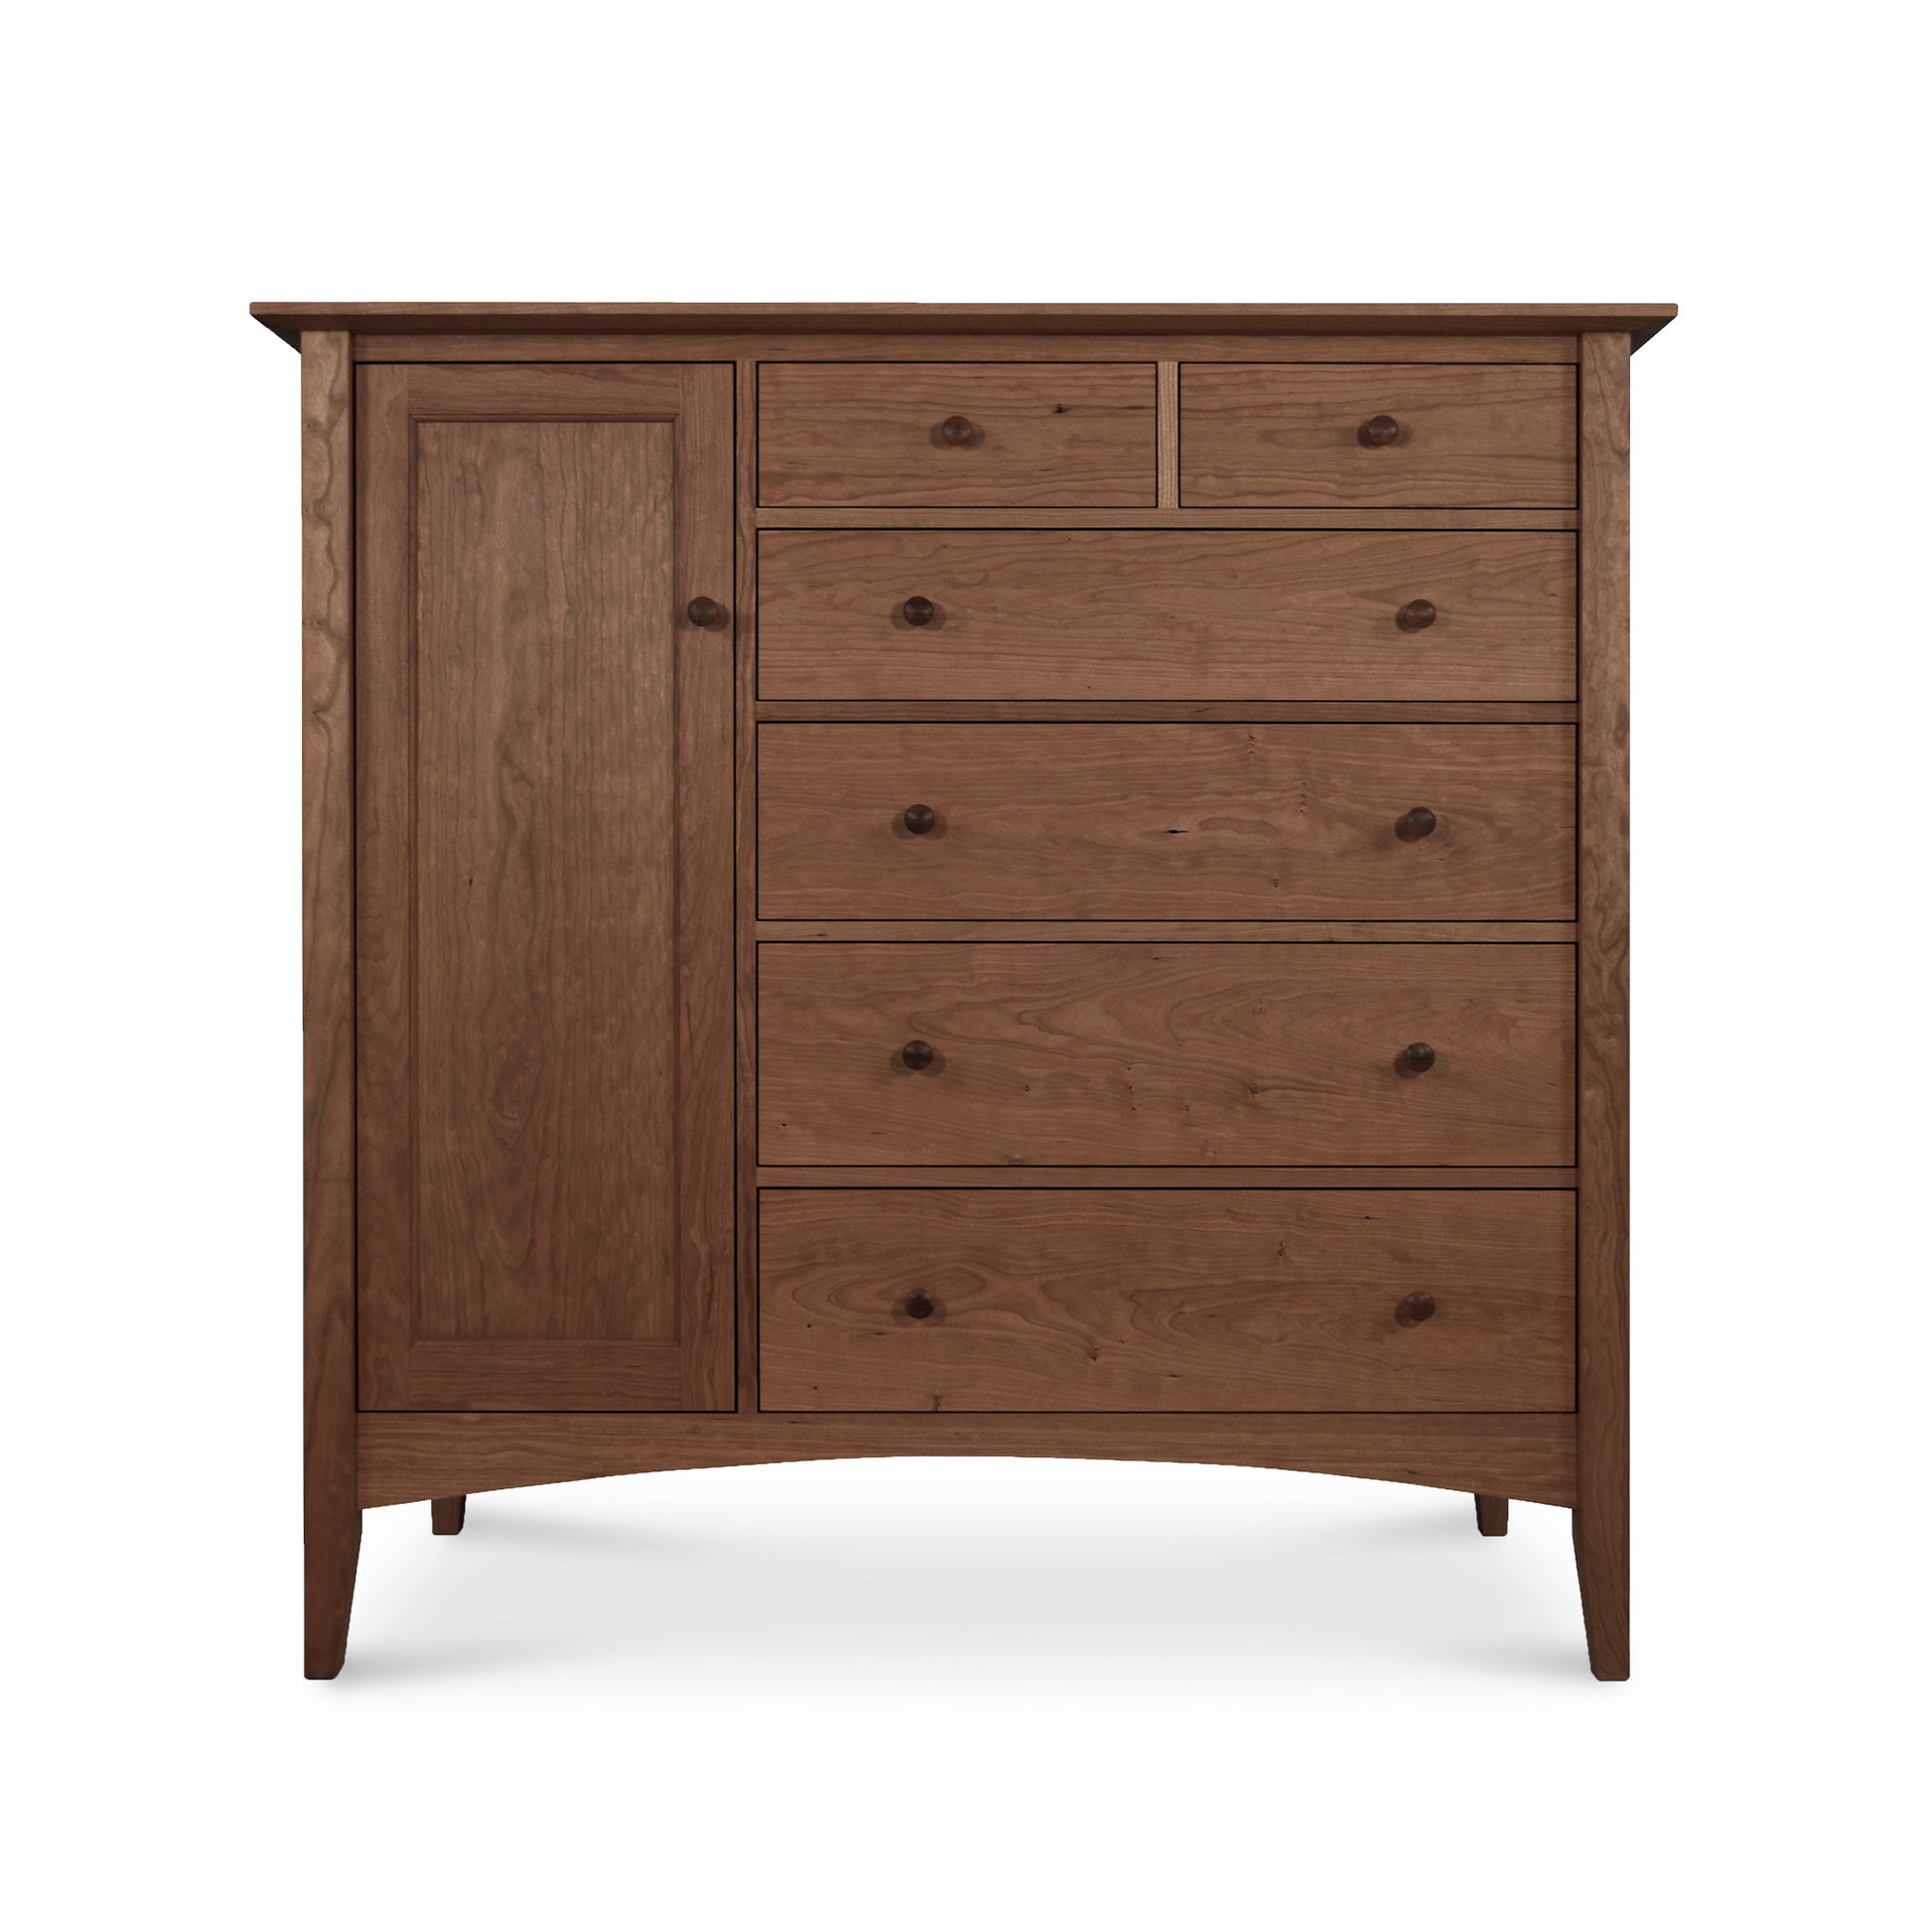 This upscale bedroom dresser showcases Maple Corner Woodworks craftsmanship with its wooden construction, featuring multiple drawers and a door for added functionality. The product is the American Shaker Gent's Chest.